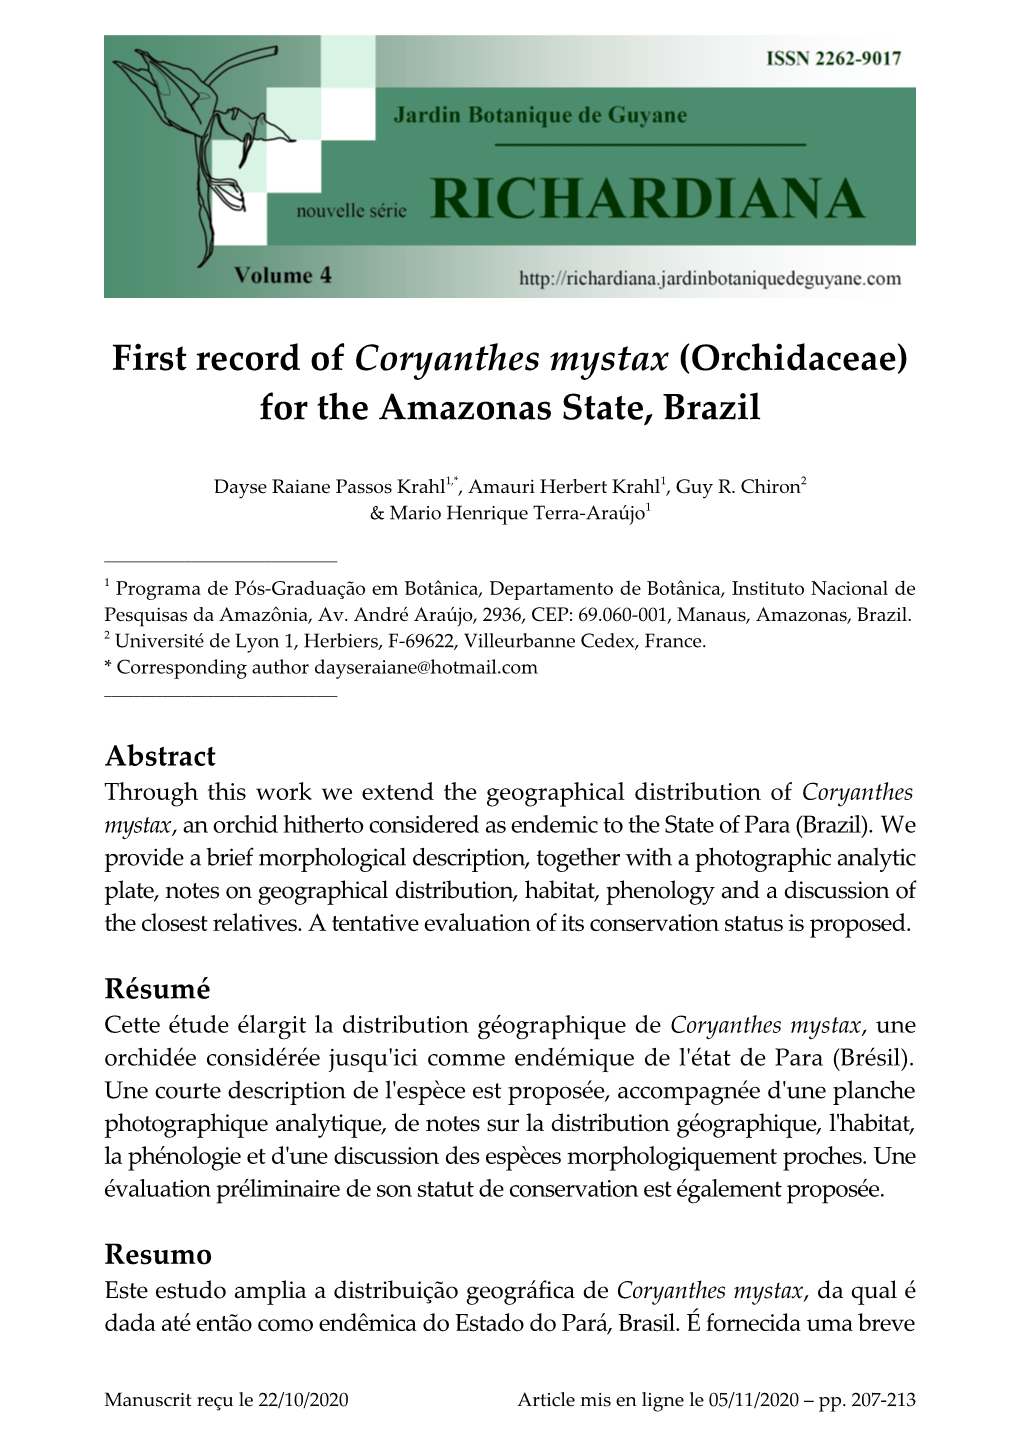 First Record of Coryanthes Mystax (Orchidaceae) for the Amazonas State, Brazil